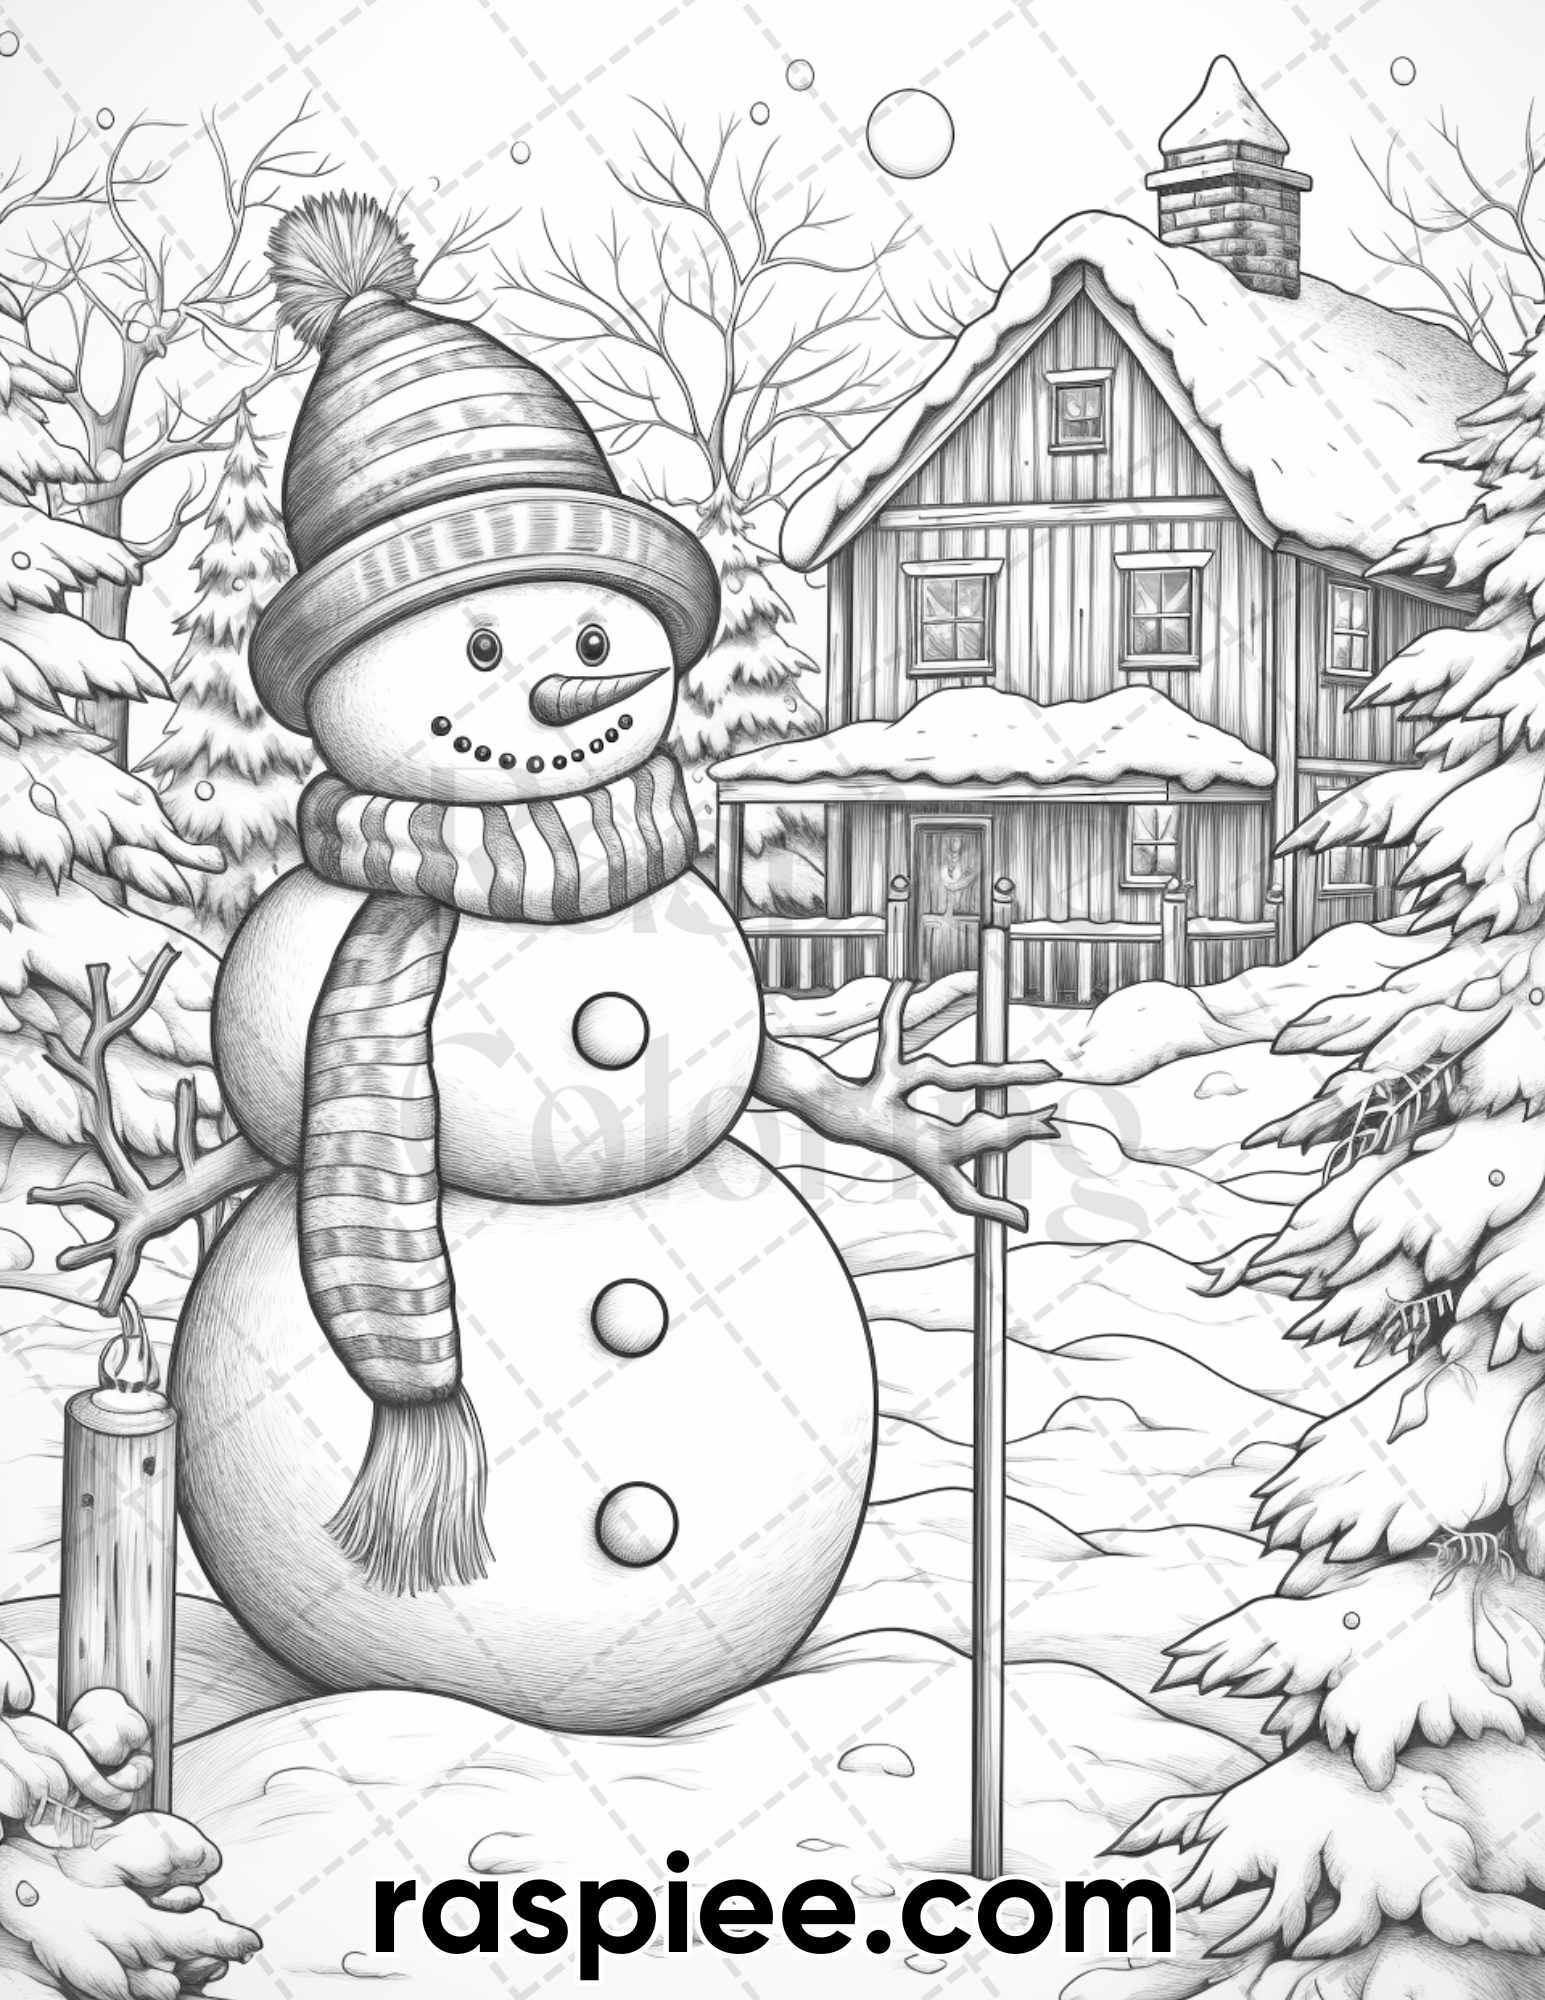 Chistmas snowman grayscale coloring pages for adults printable pdf â coloring